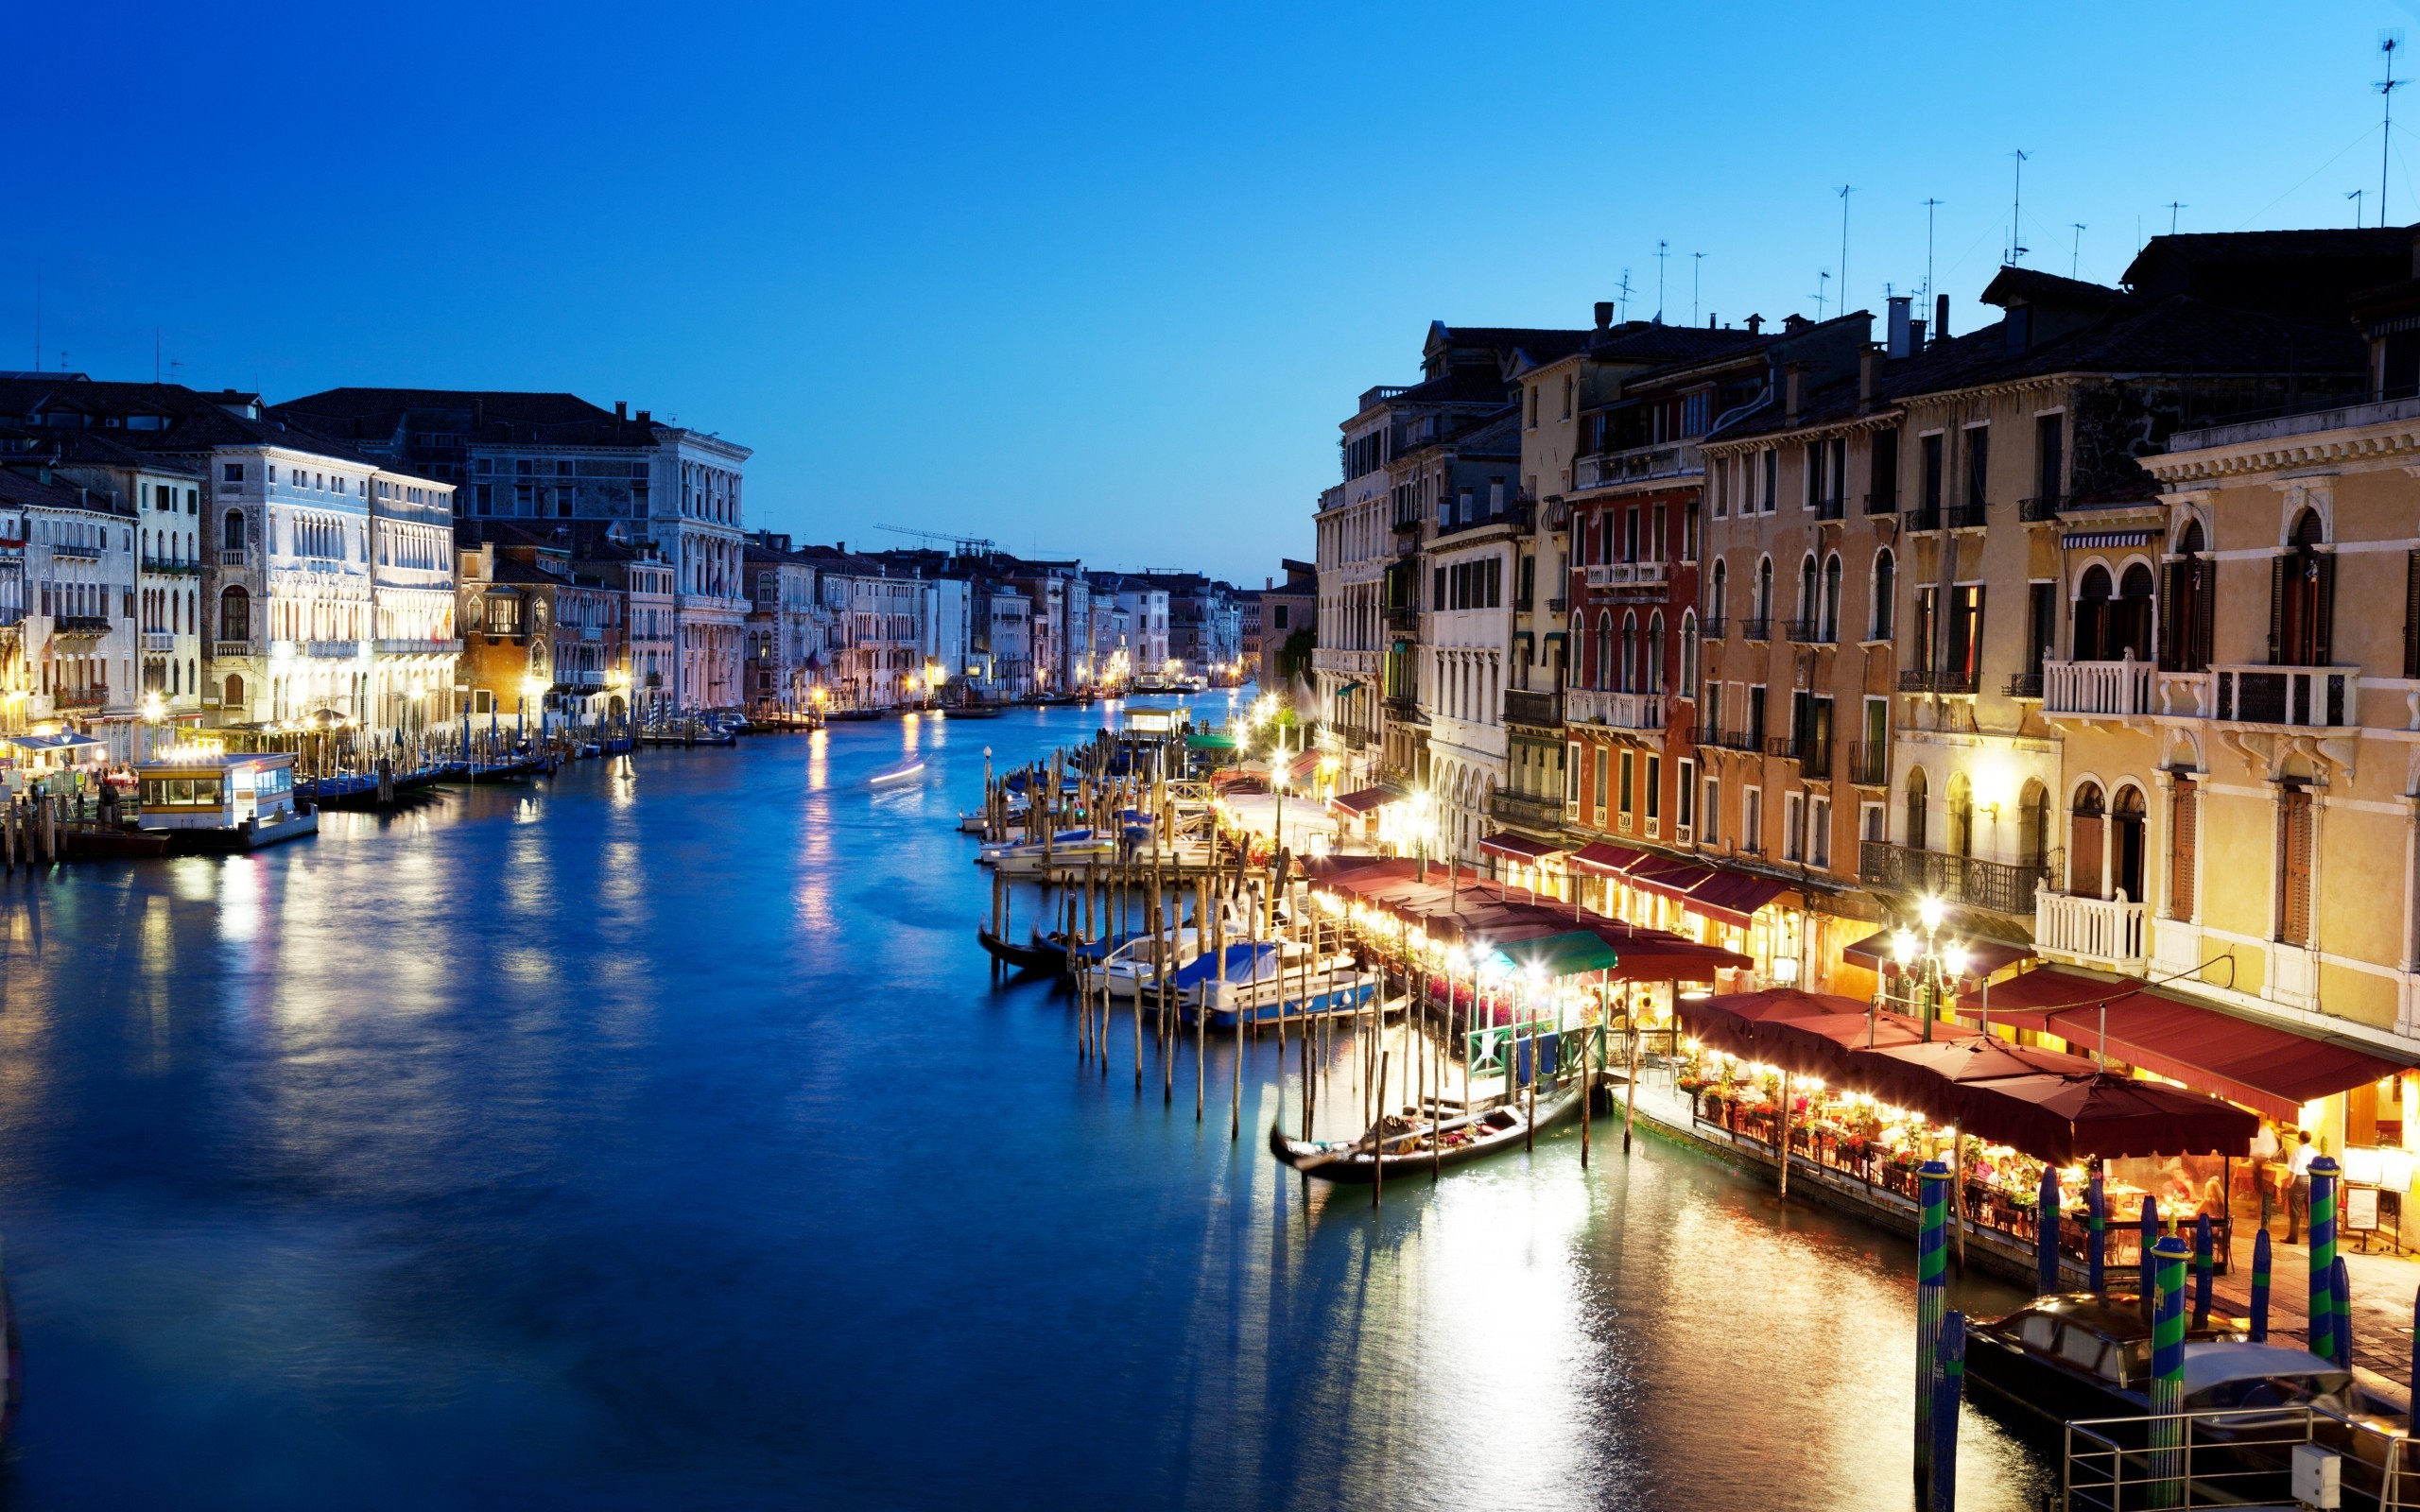 2560x1600 Grand Canal In Venice Italy At Sunset (click to view)